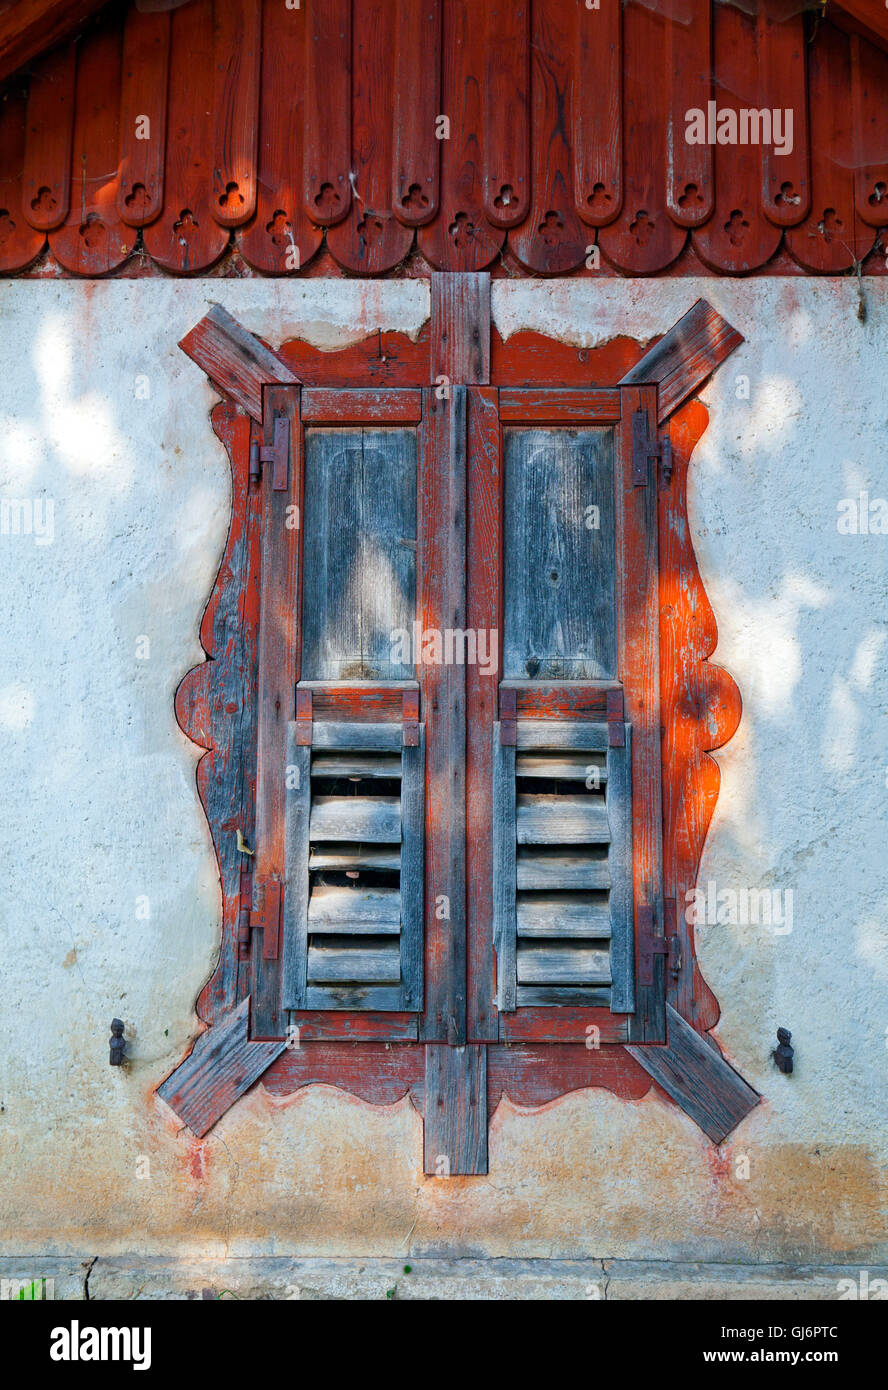 Window in wall of a house with wooden ornaments Stock Photo